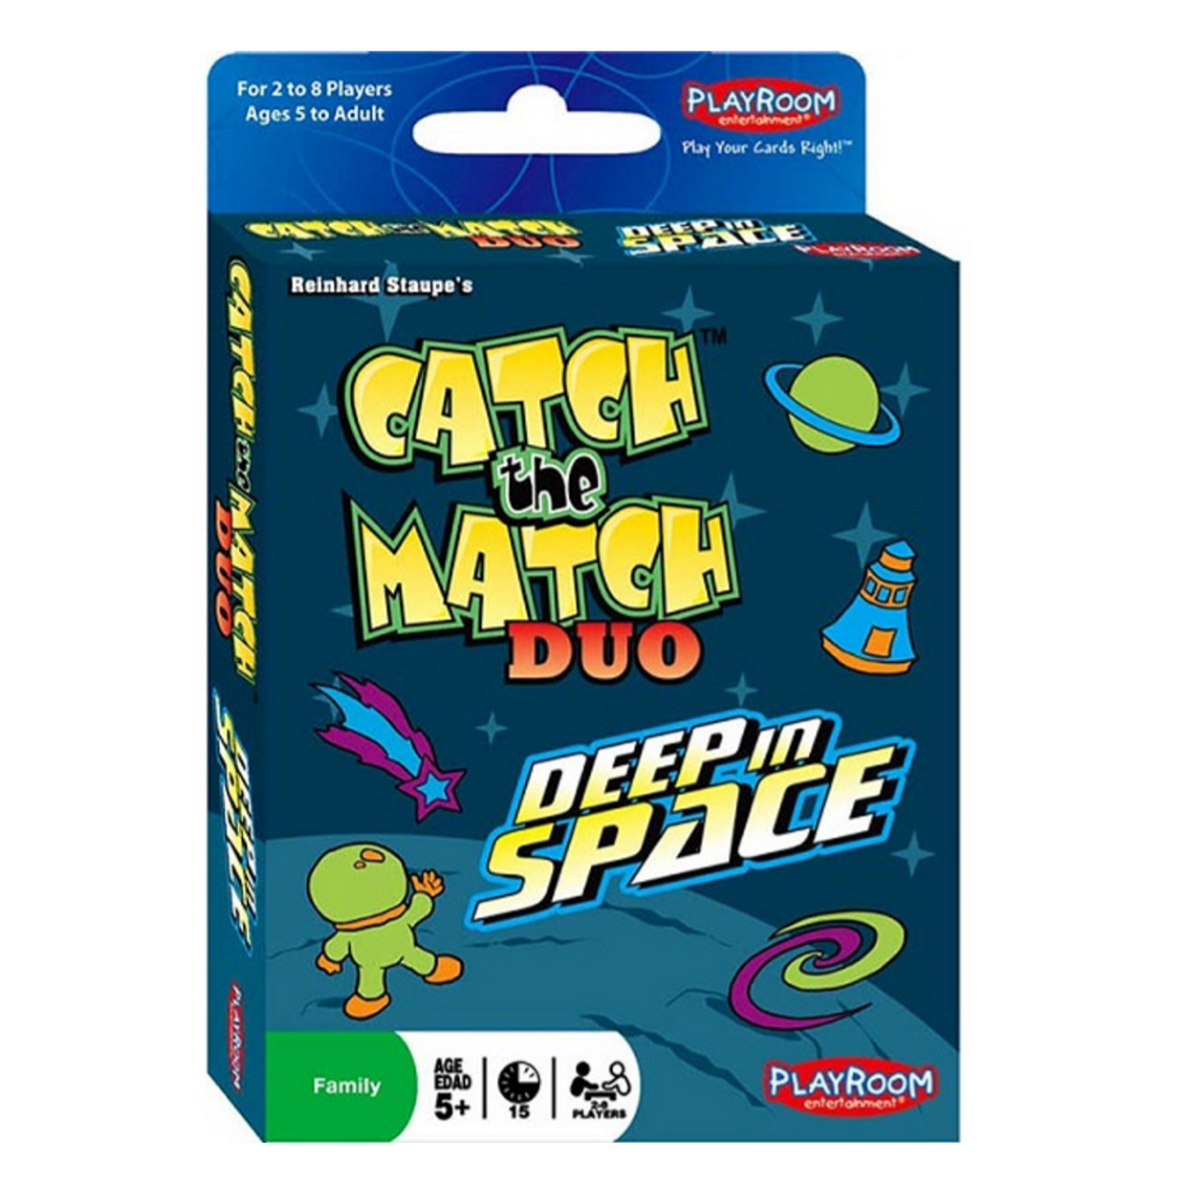 Catch The Match Duo - Deep in Space